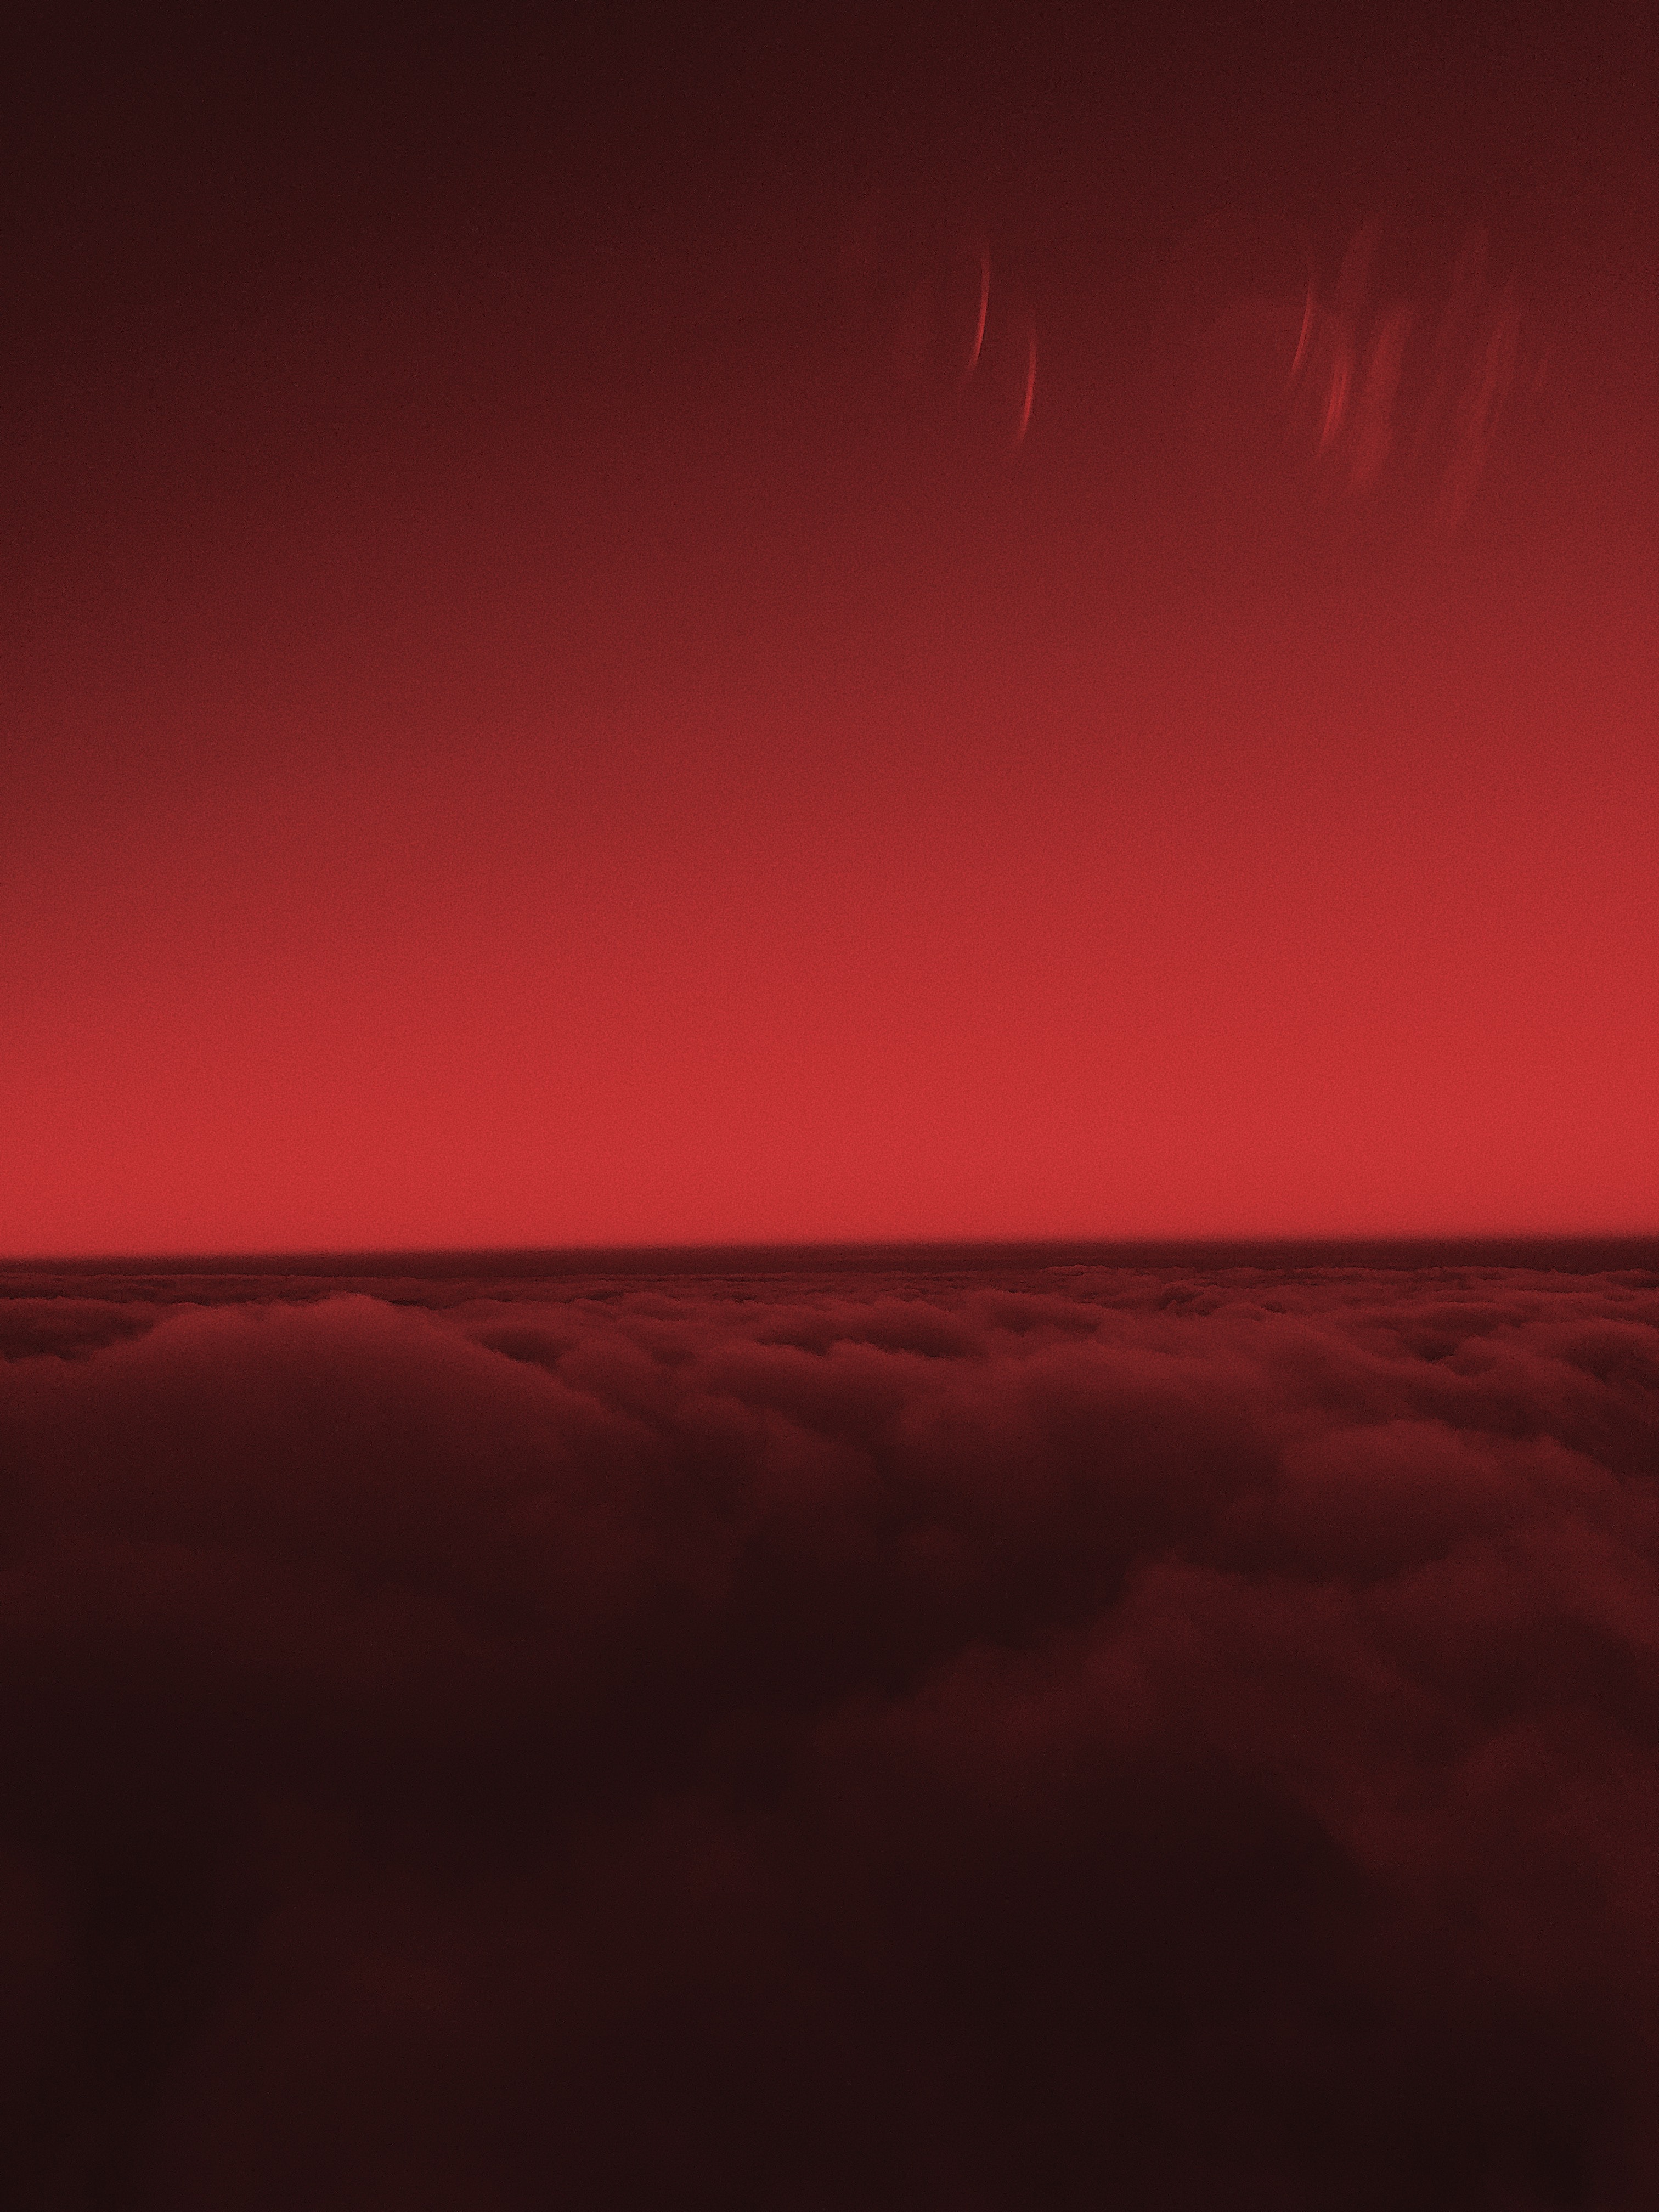 A red sky with clouds - Light red